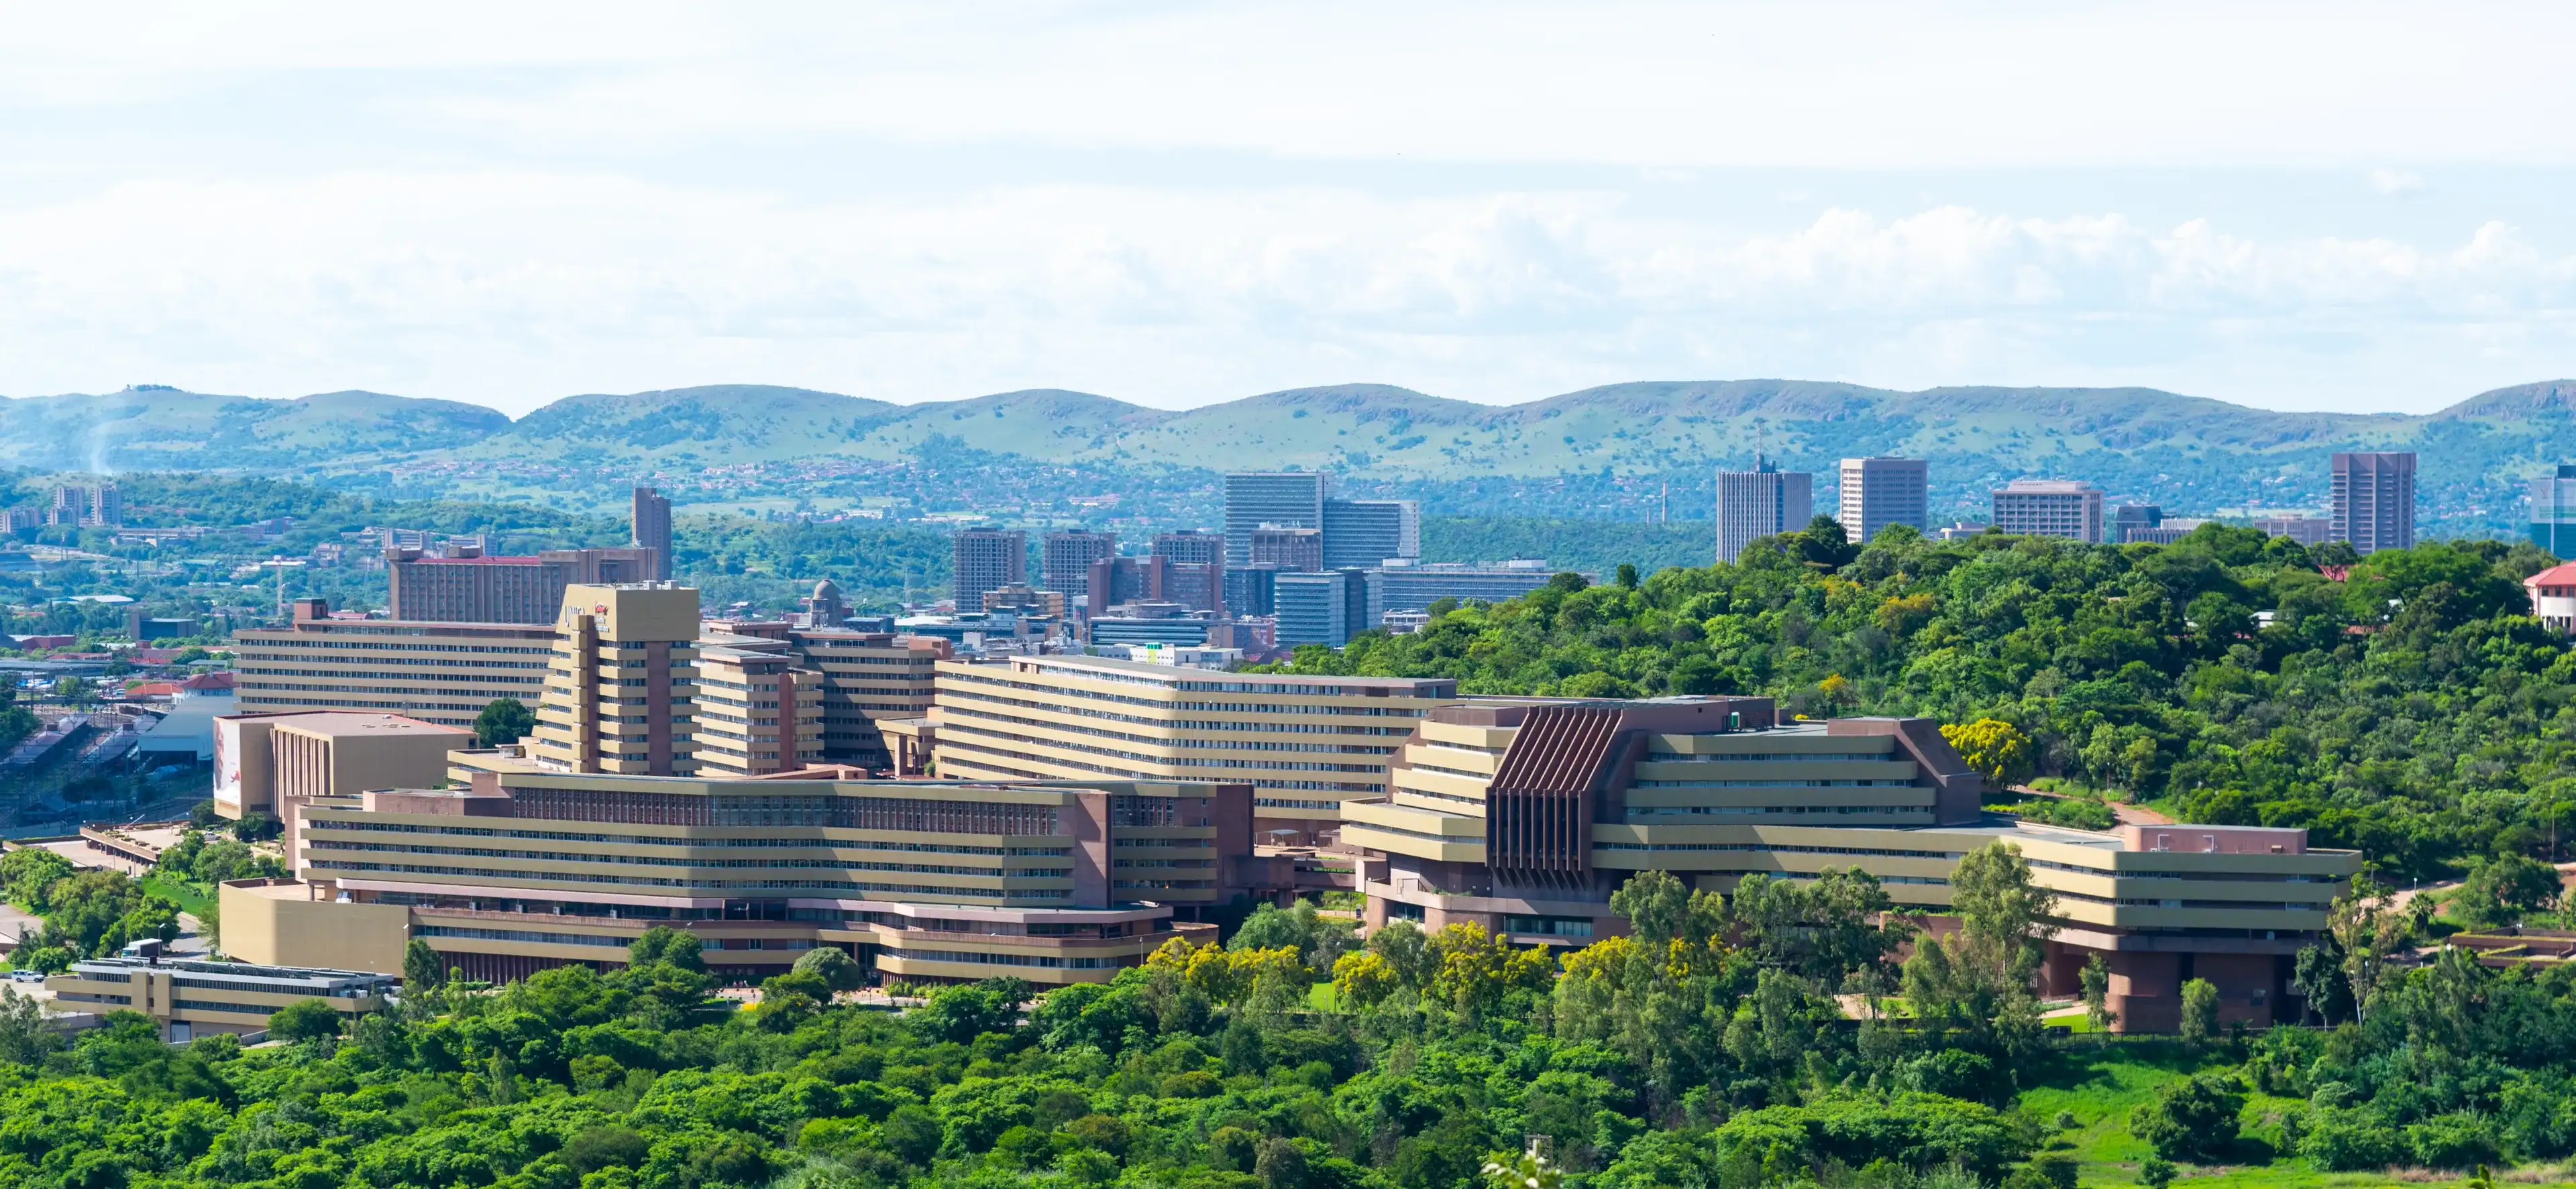 Pretoria, Gauteng, South Africa - Dec. 20 2020: The University of South Africa between the green trees of a rainy season summer. A world class distance learning facility.